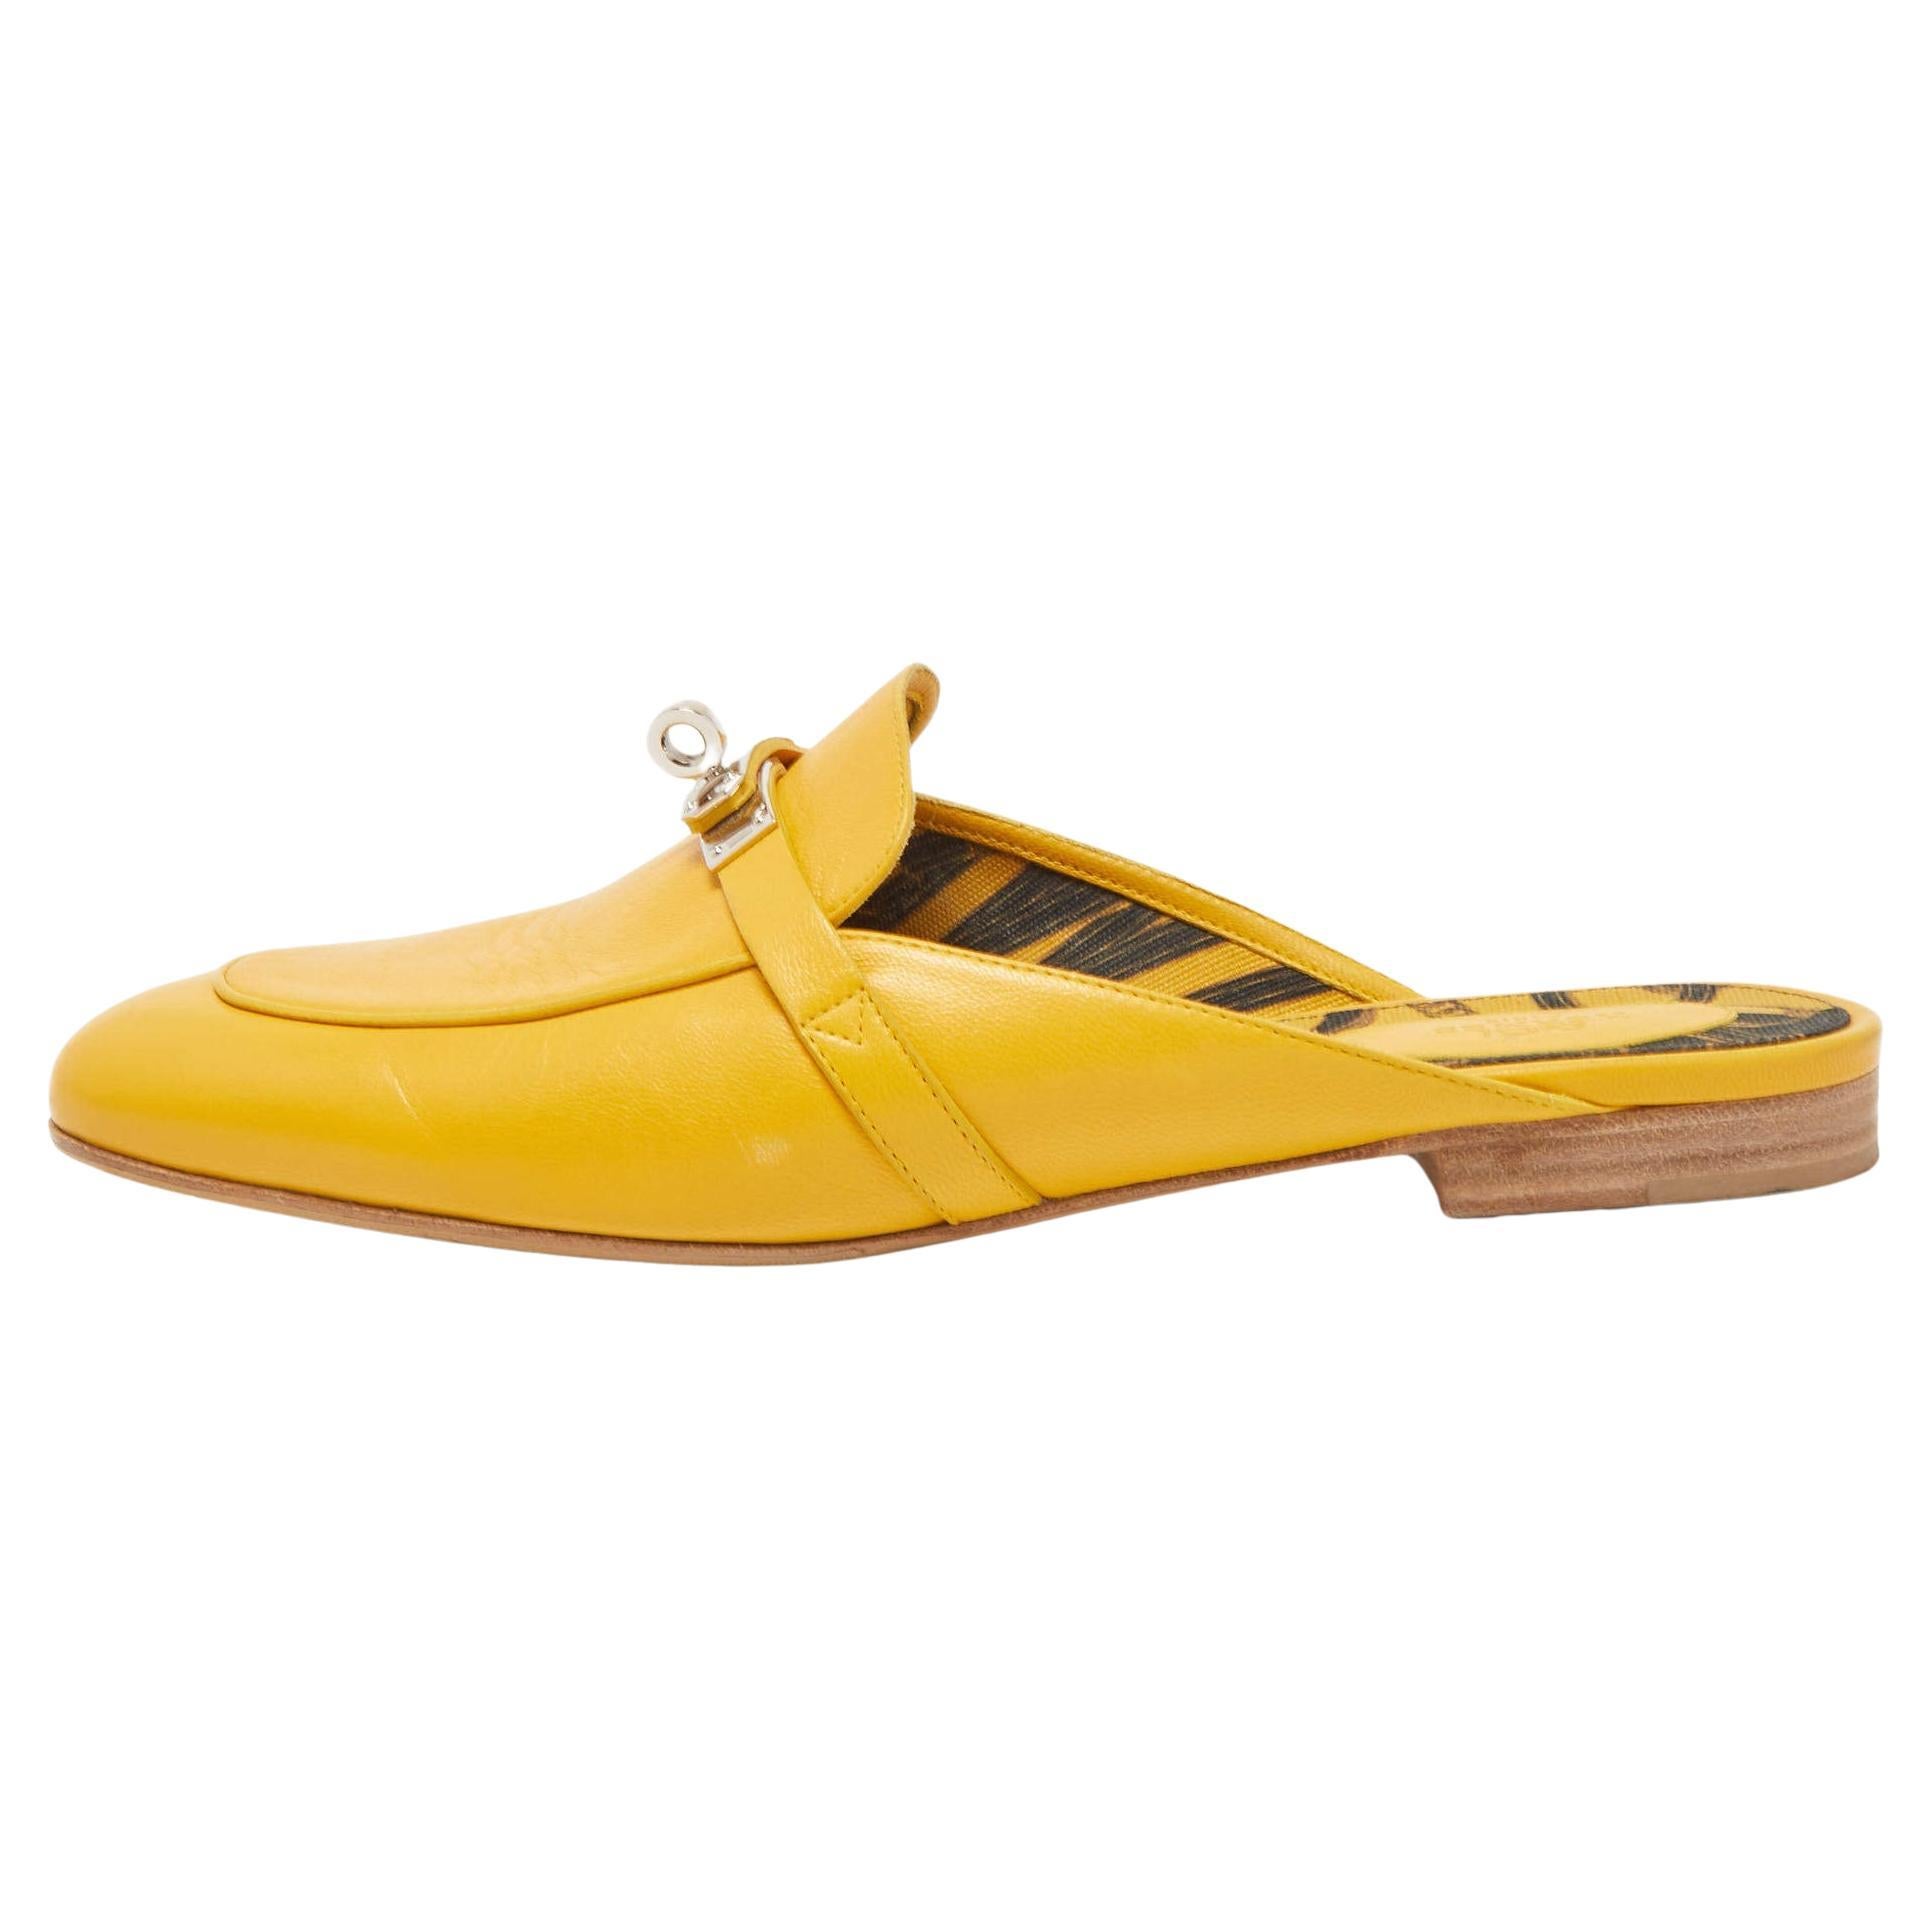 Hermes Yellow Leather Oz Flat Mules Size 41